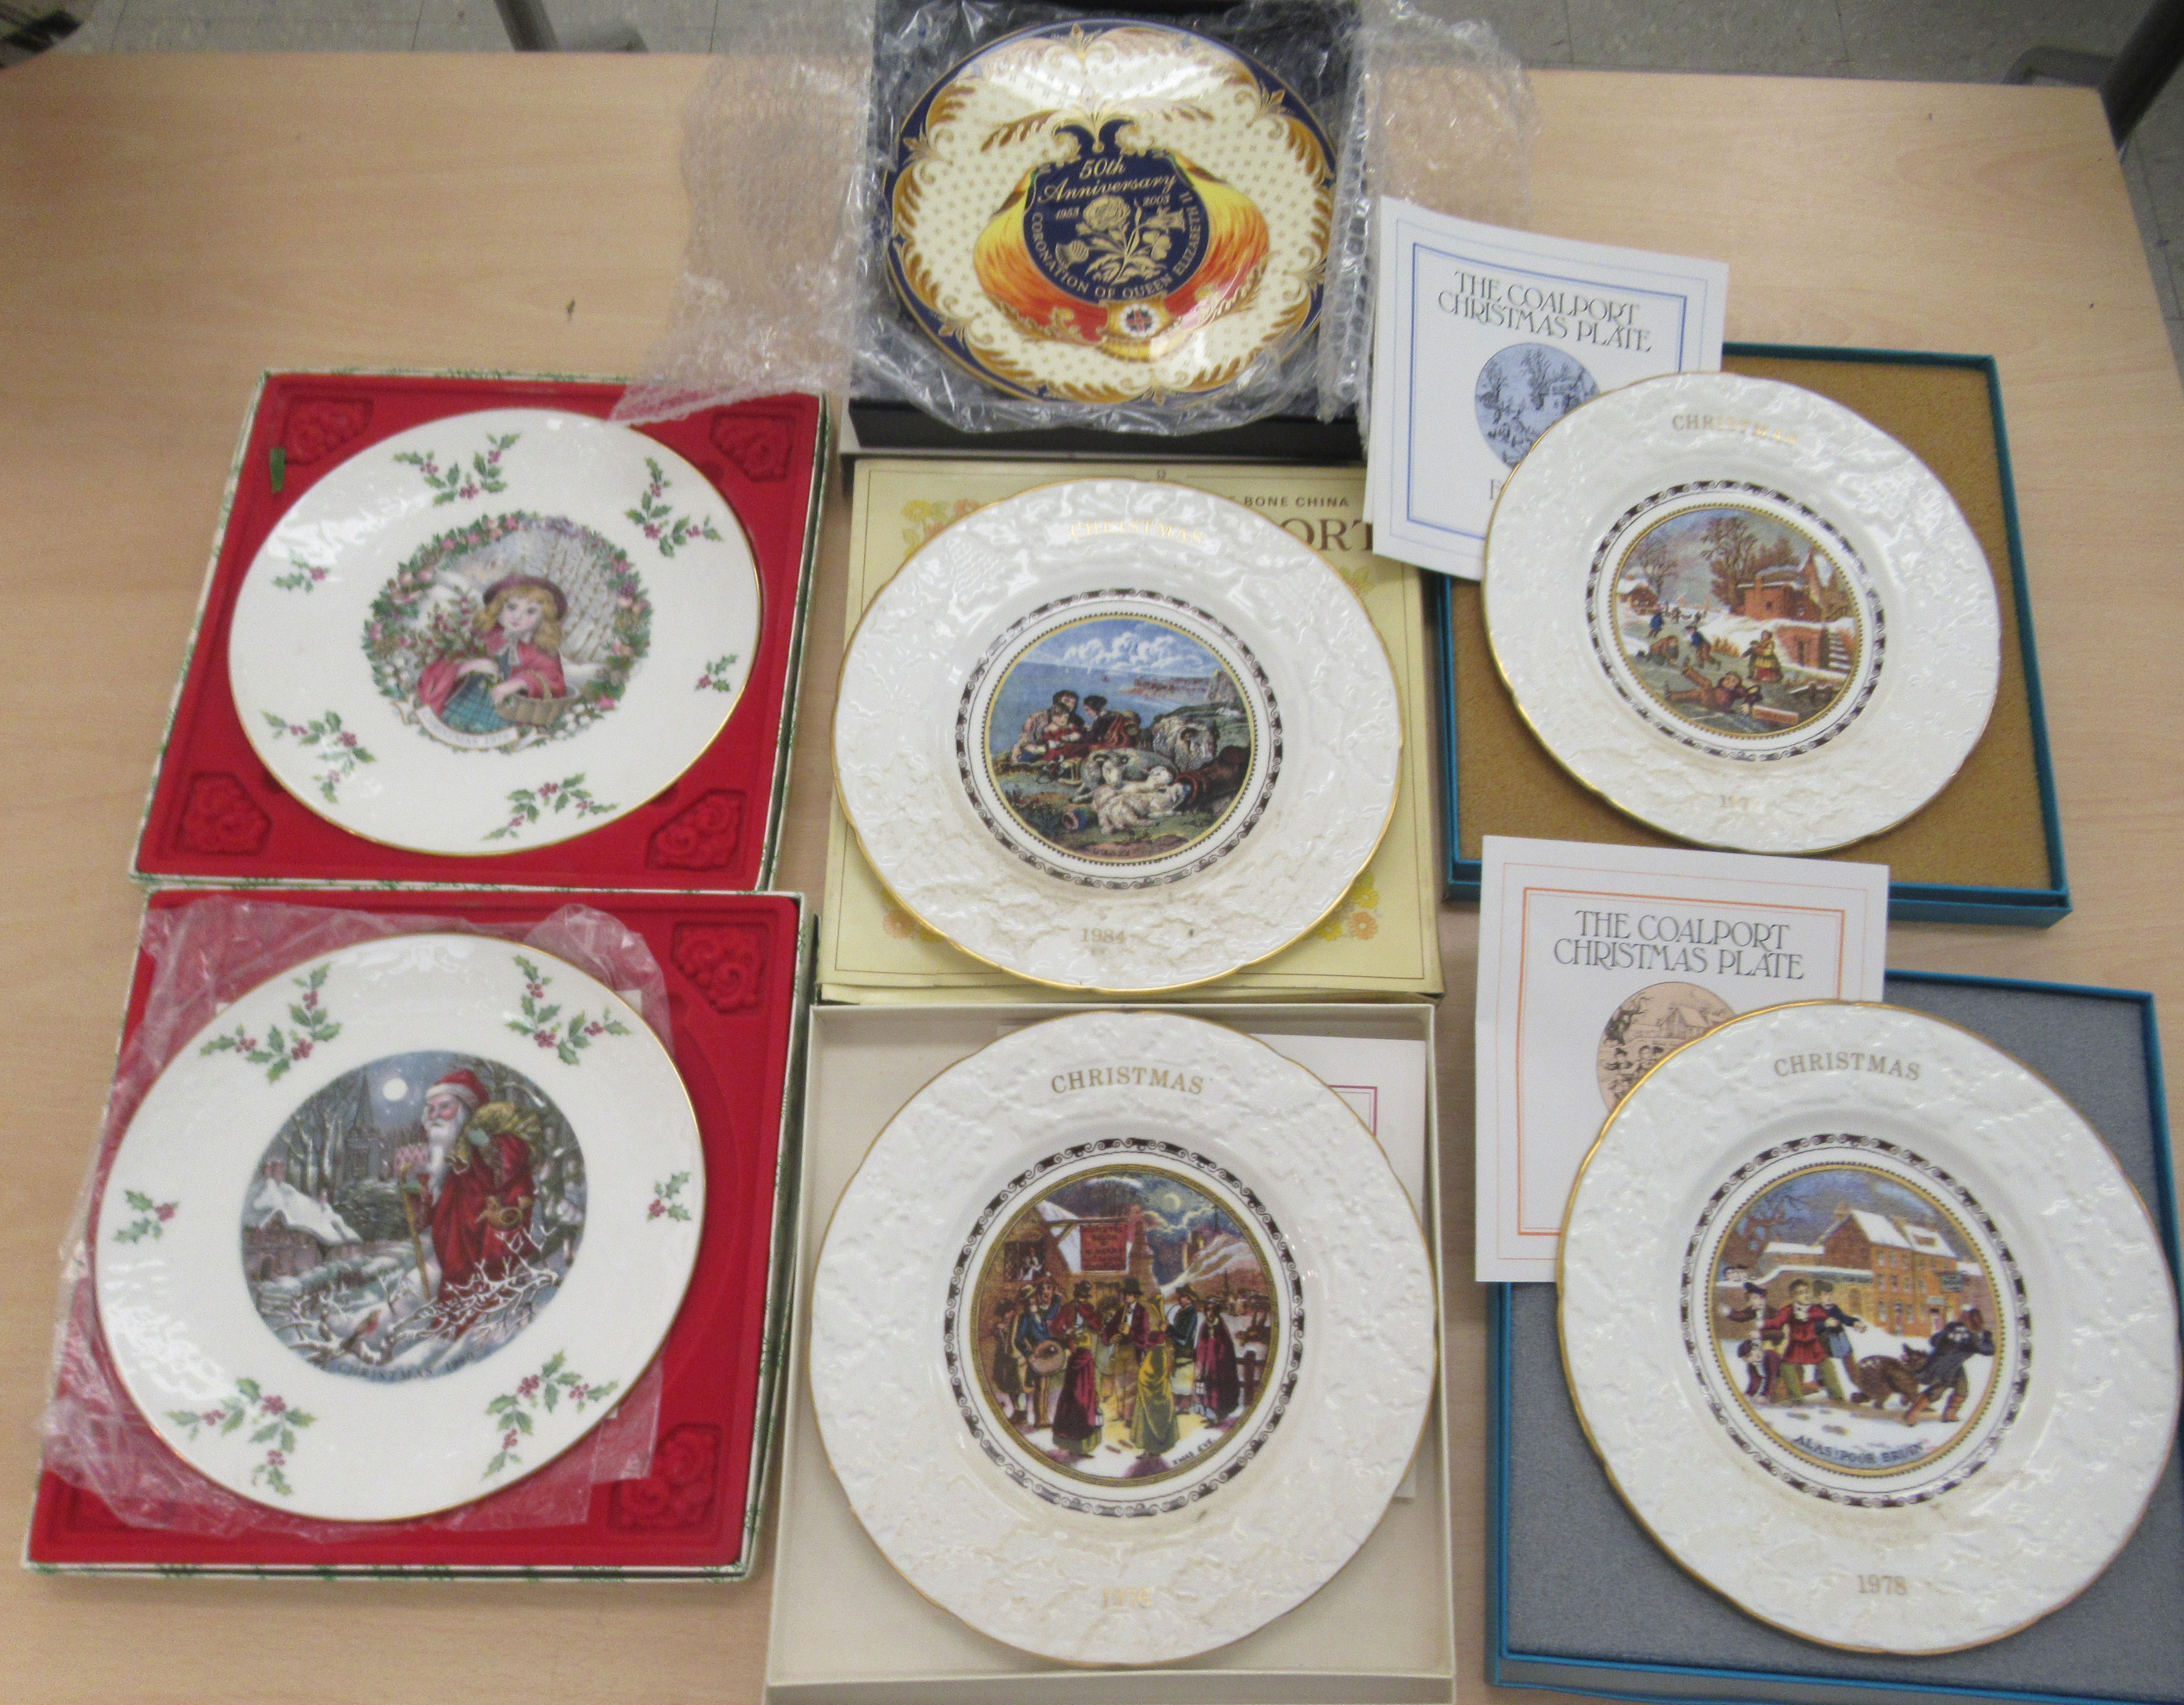 Decorative ceramics, mainly plates with examples by Coalport and Royal Doulton  9"-11"dia  some